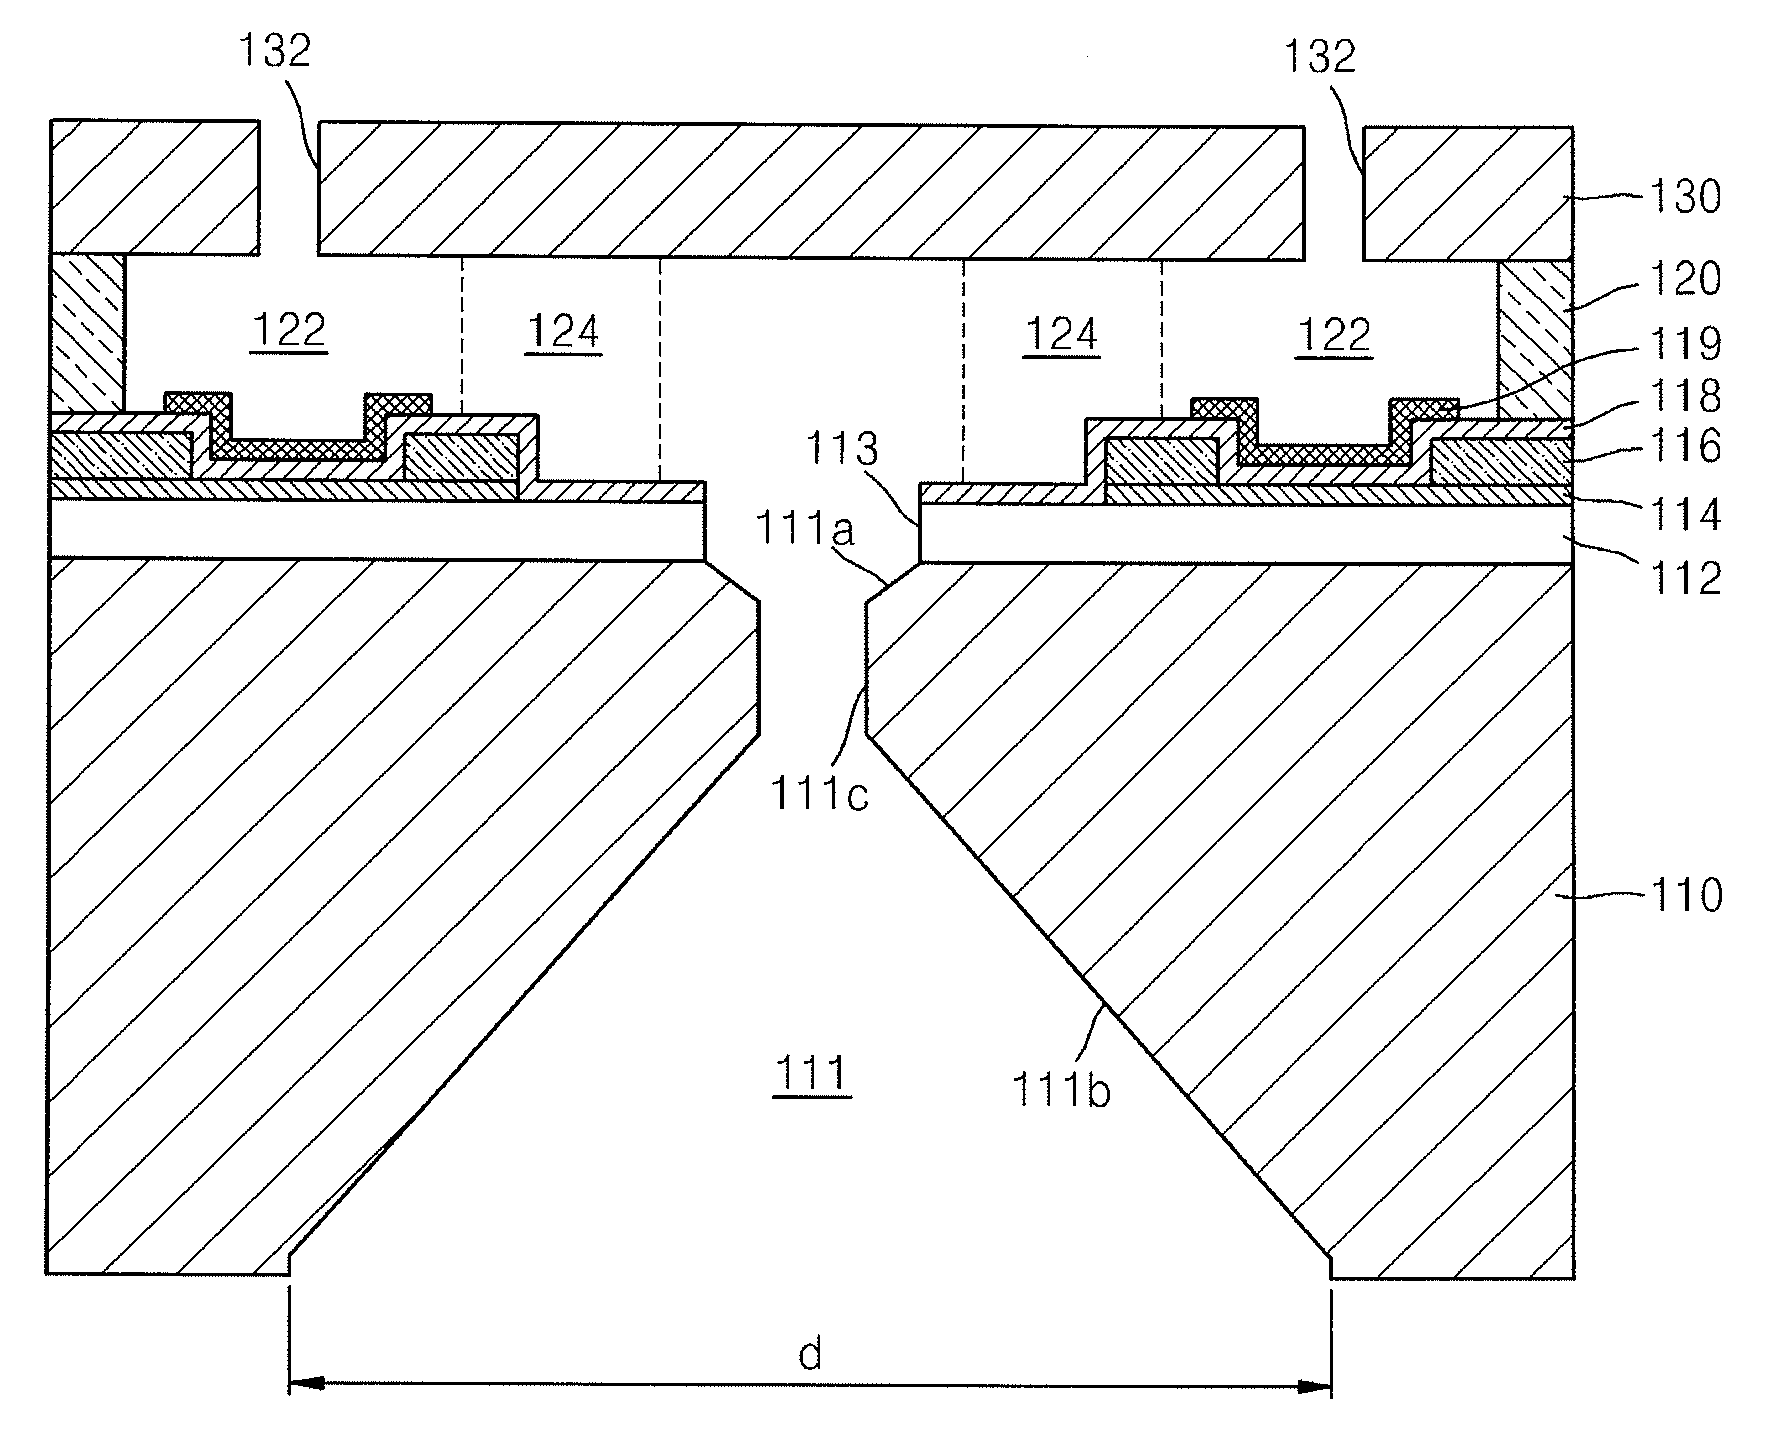 Inkjet print head and method of manufacturing the same